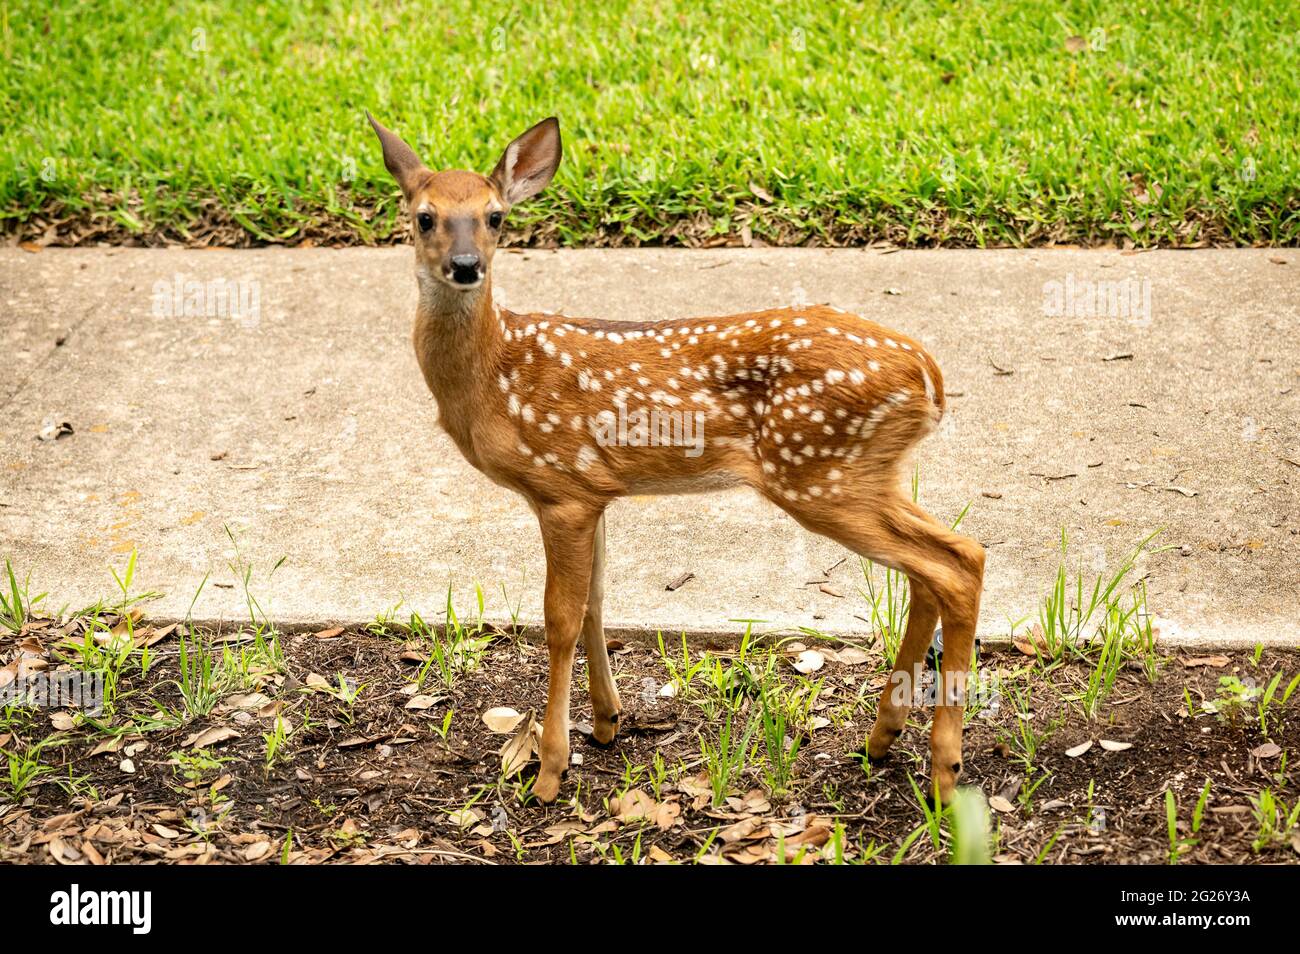 Austin, Texas, USA. 31 May, 2021. Baby Deer. Twin baby deer are left in an urban area during the day while their mother searches for food in the front Stock Photo